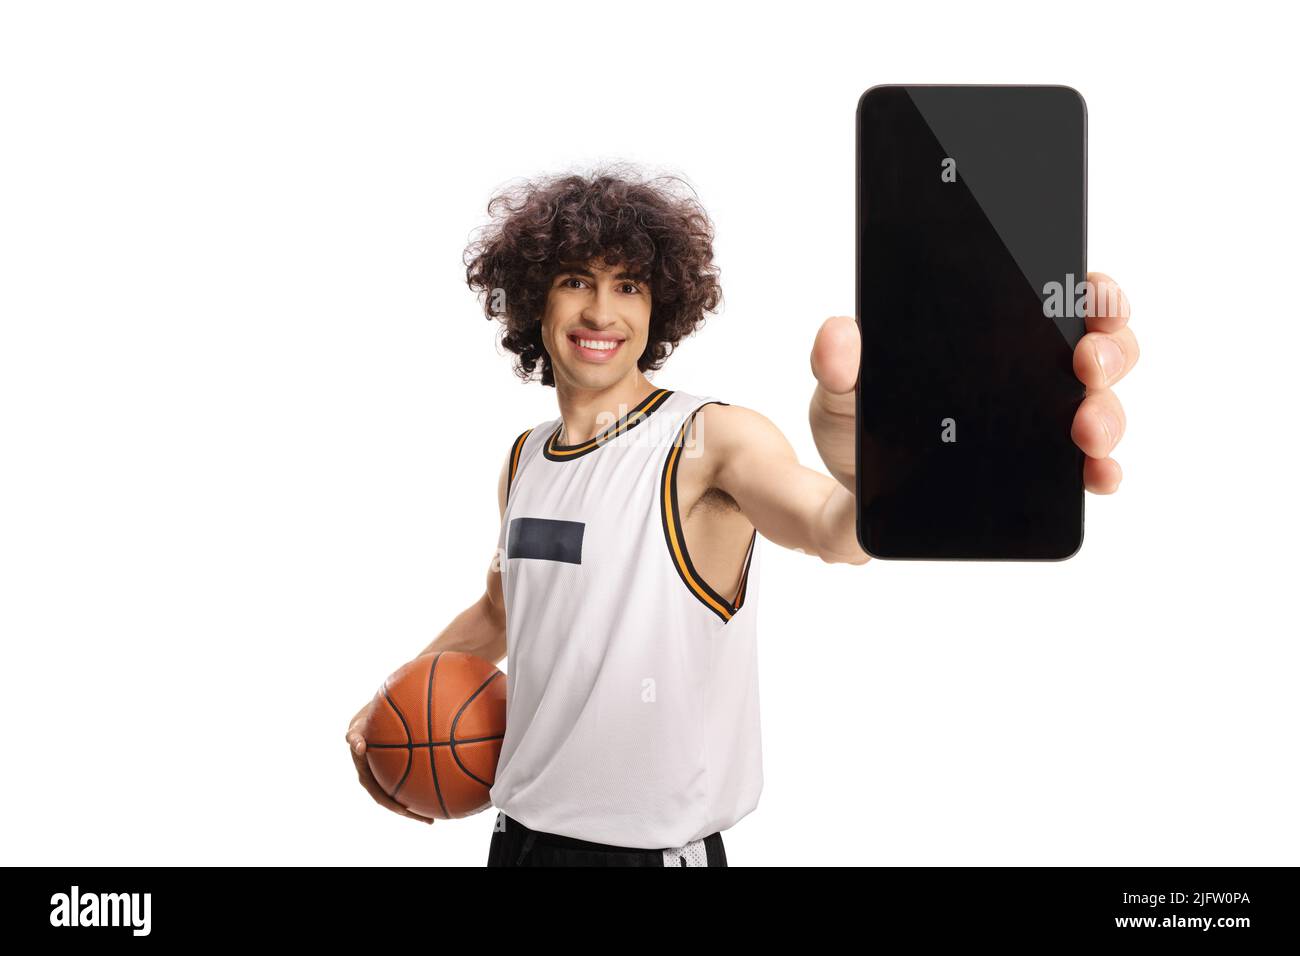 Basketball player holding a ball and showing a smartphone isolated on white background Stock Photo